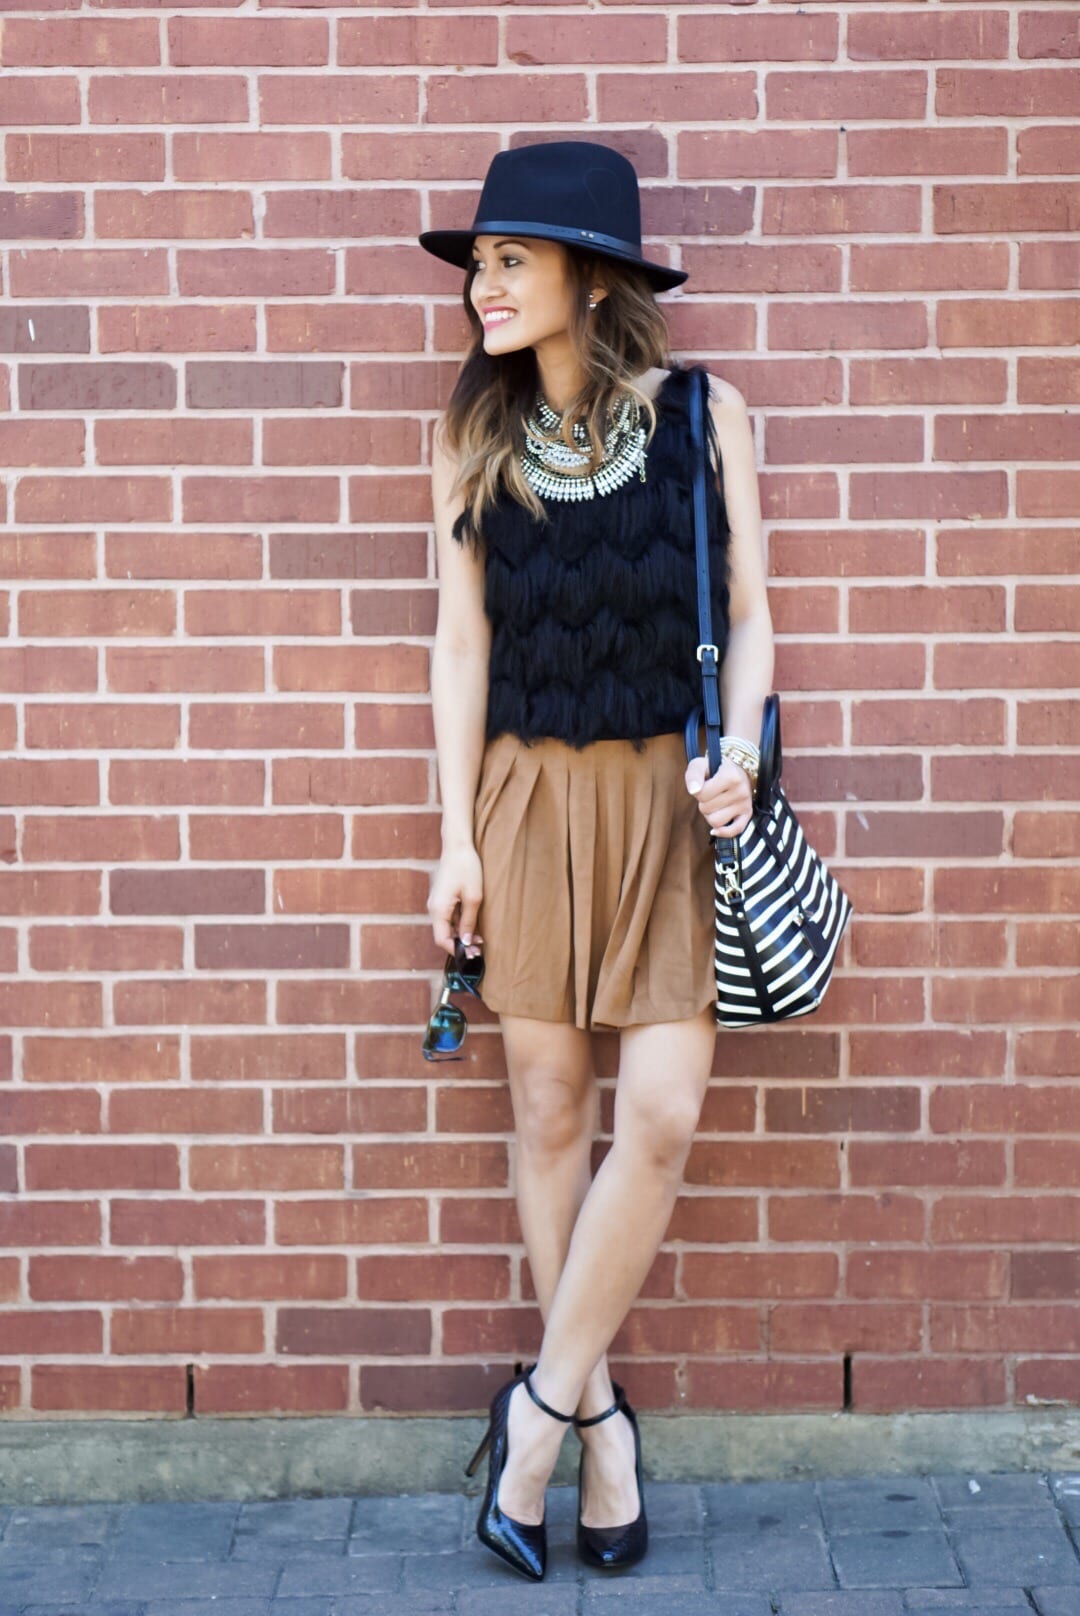 City Chic - Suede Skirt and Fringe Top